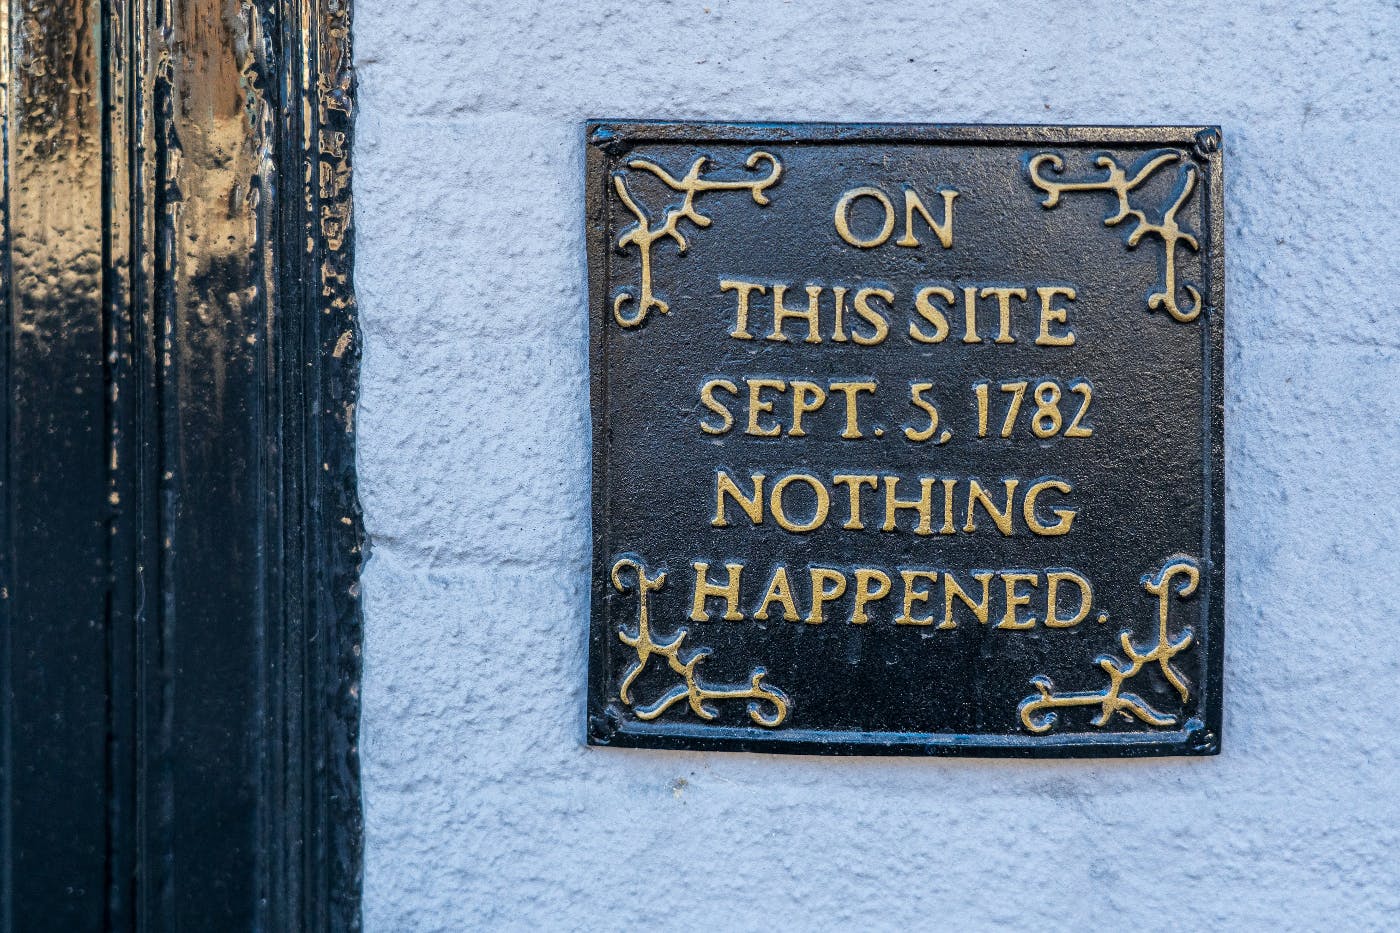 A plaque on a wall reading: "On this site  Sept 5, 1782 Nothing Happened